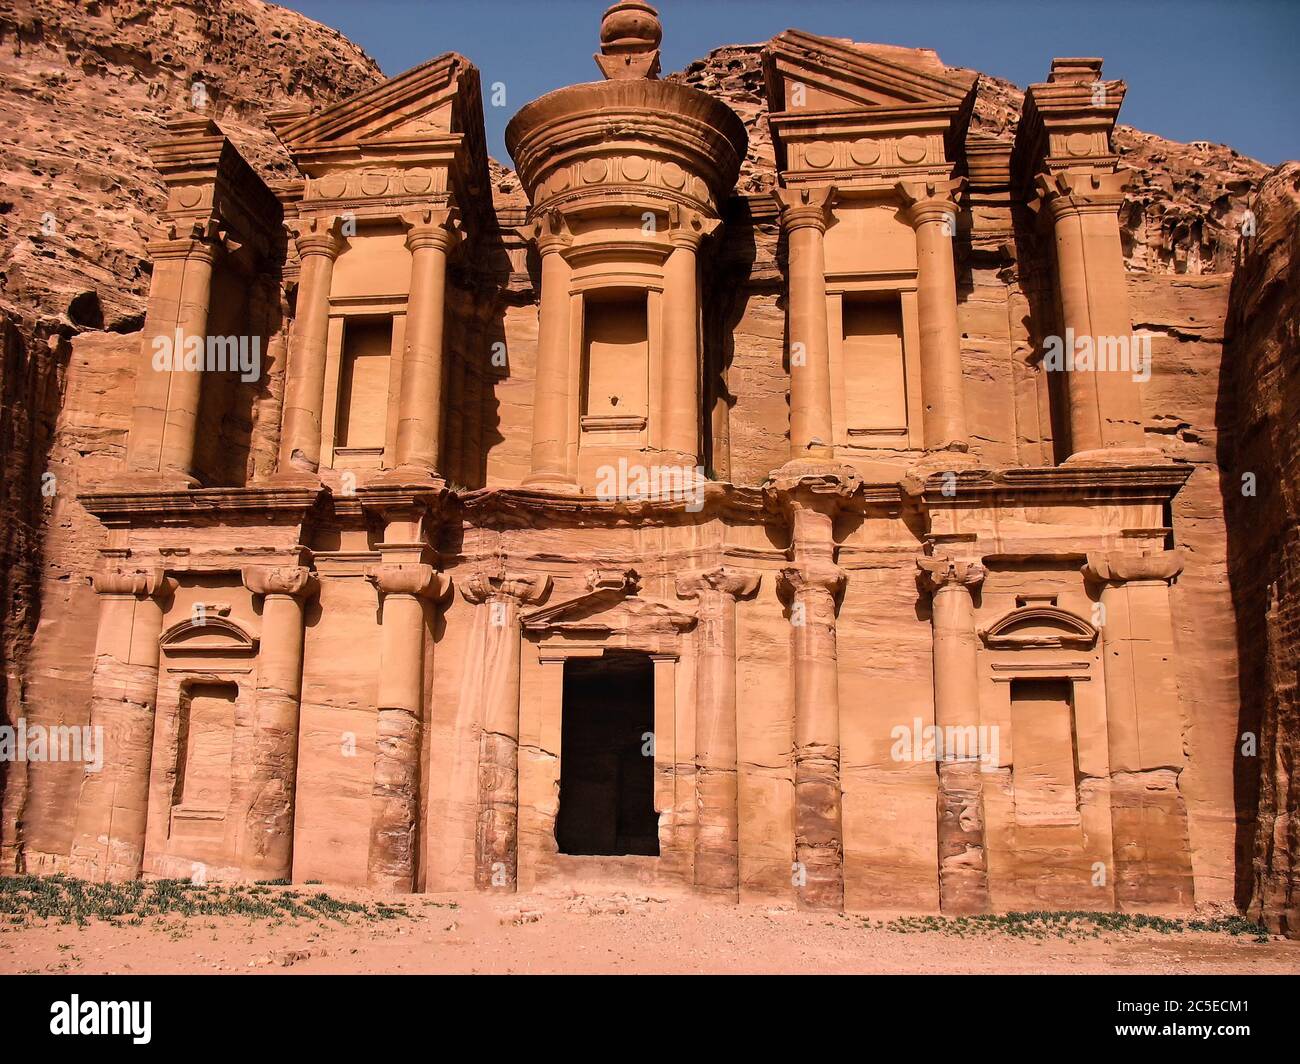 Archaeological site of Petra, one of the wonders of the modern world Stock Photo